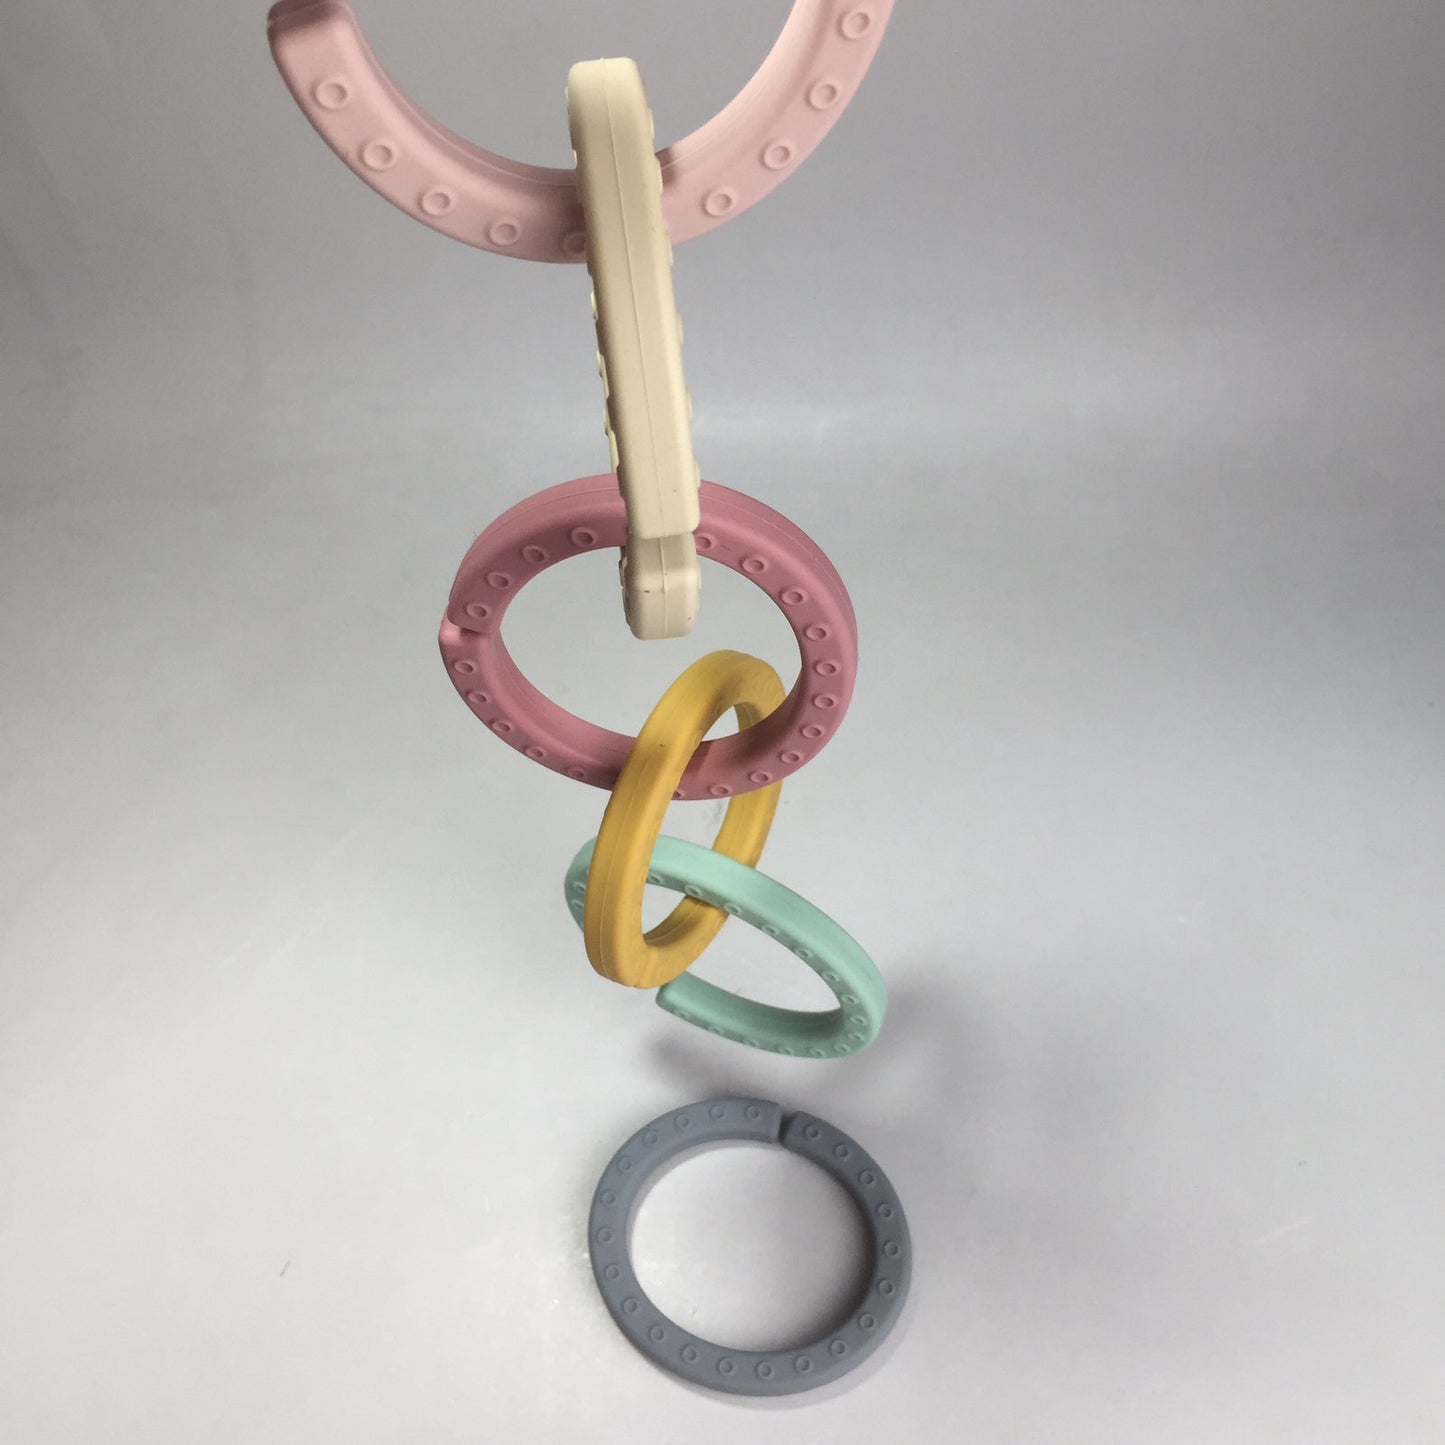 Silicone Teether Link Rings for Stroller & Car Seat